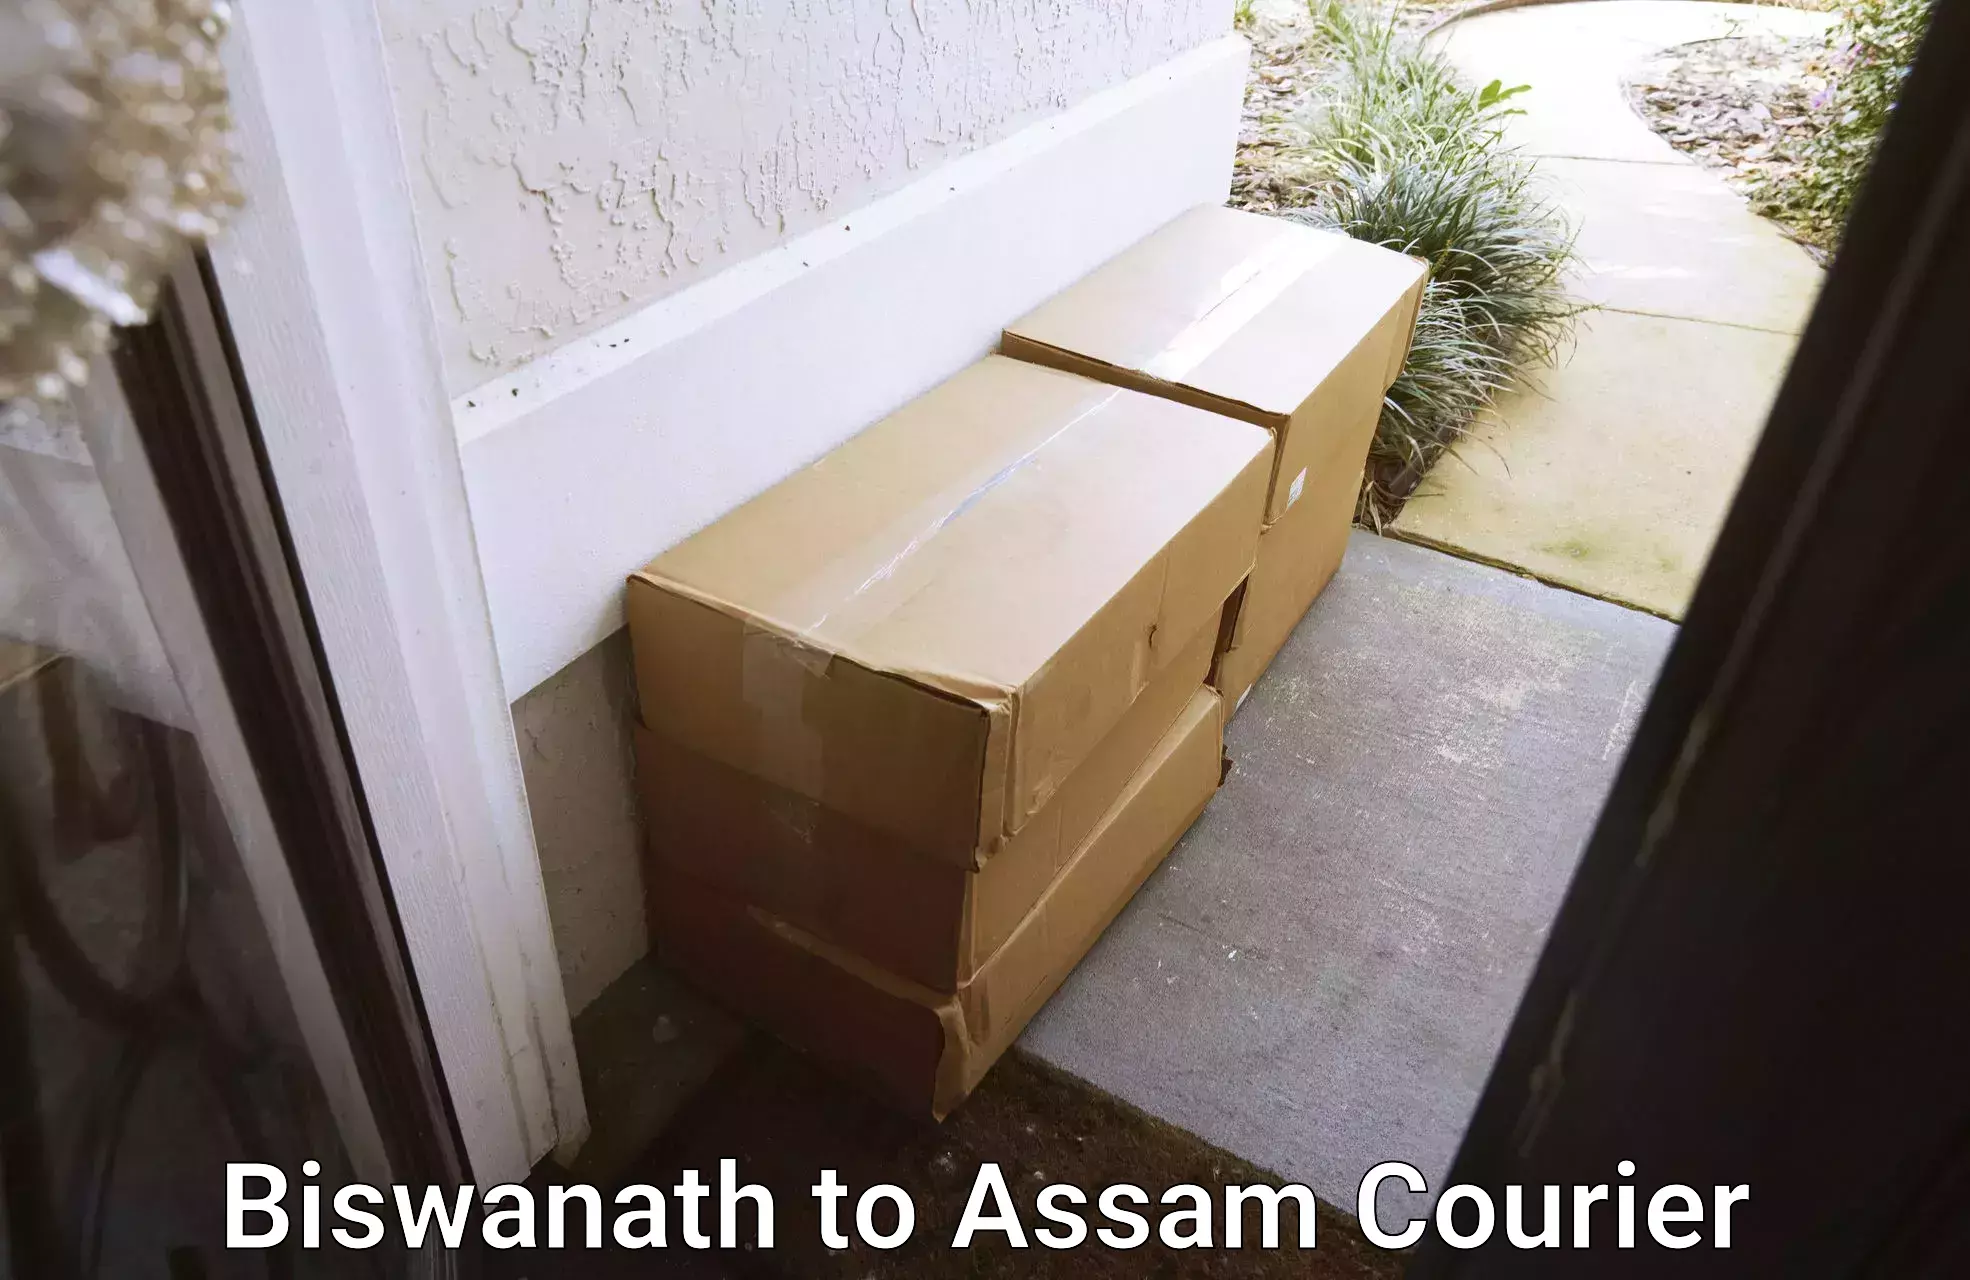 Cargo courier service Biswanath to Sonitpur